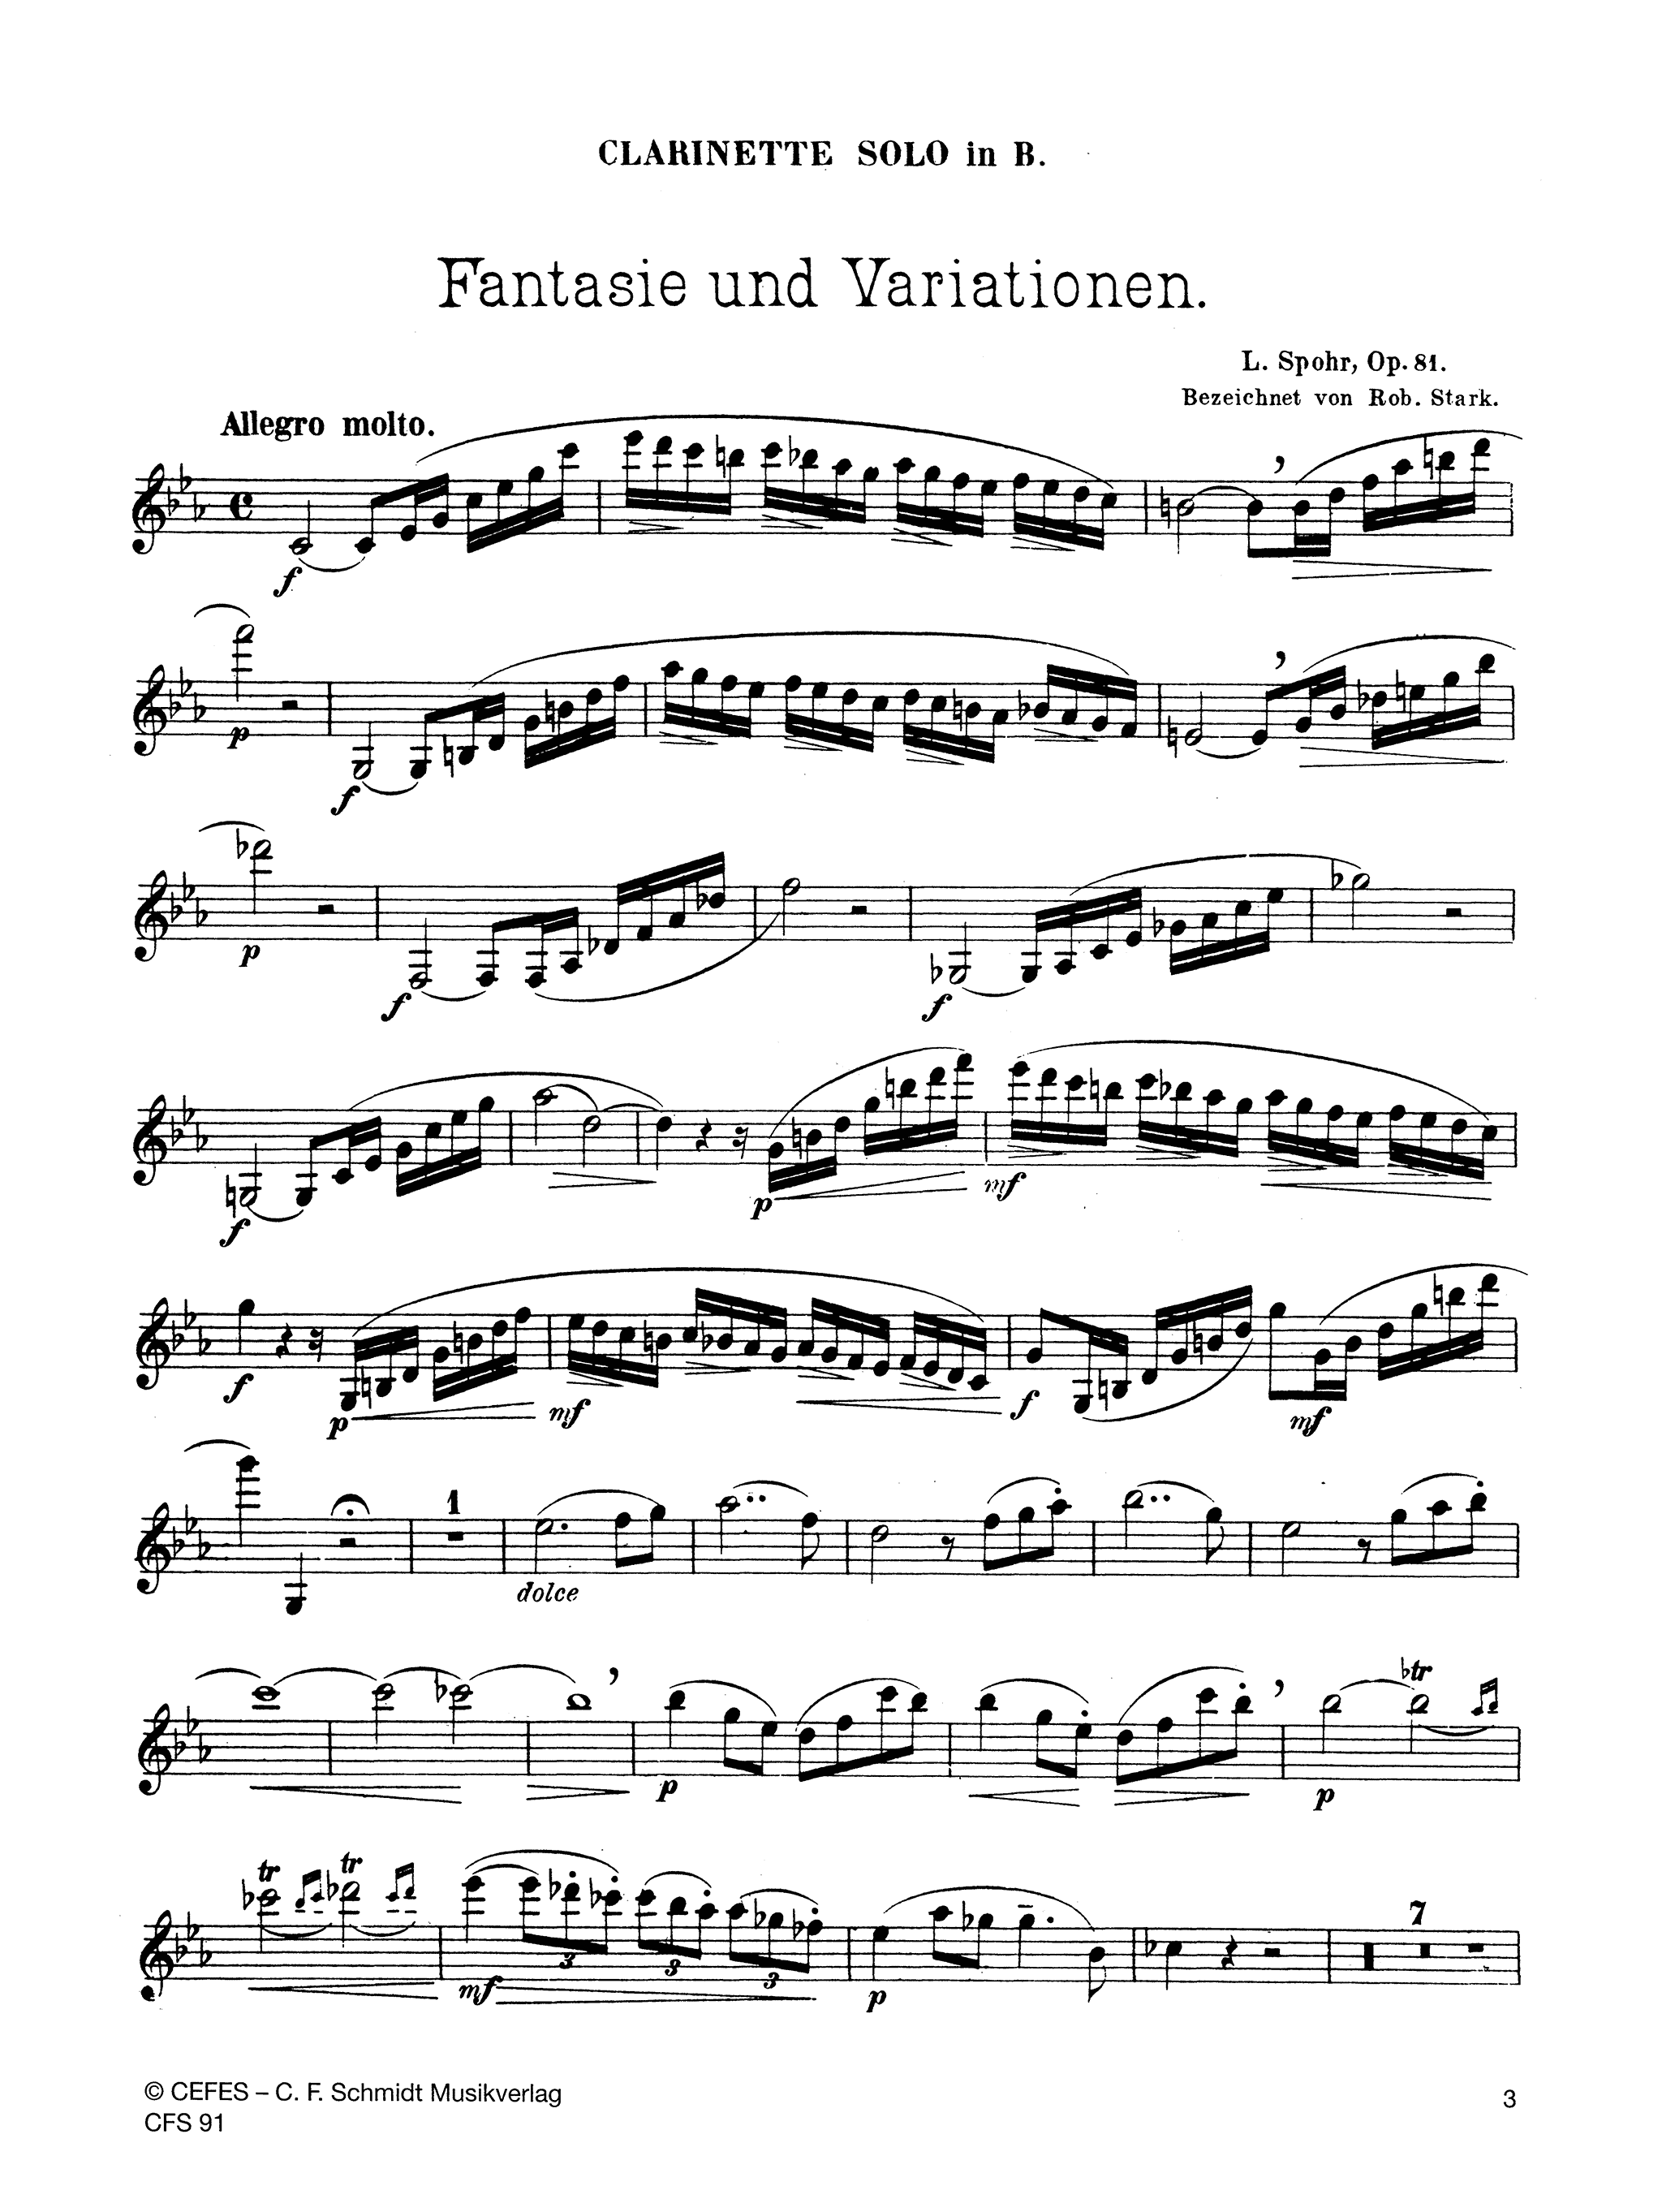 Spohr Fantasy & Variations on a Theme of Danzi, Op. 81 clarinet part